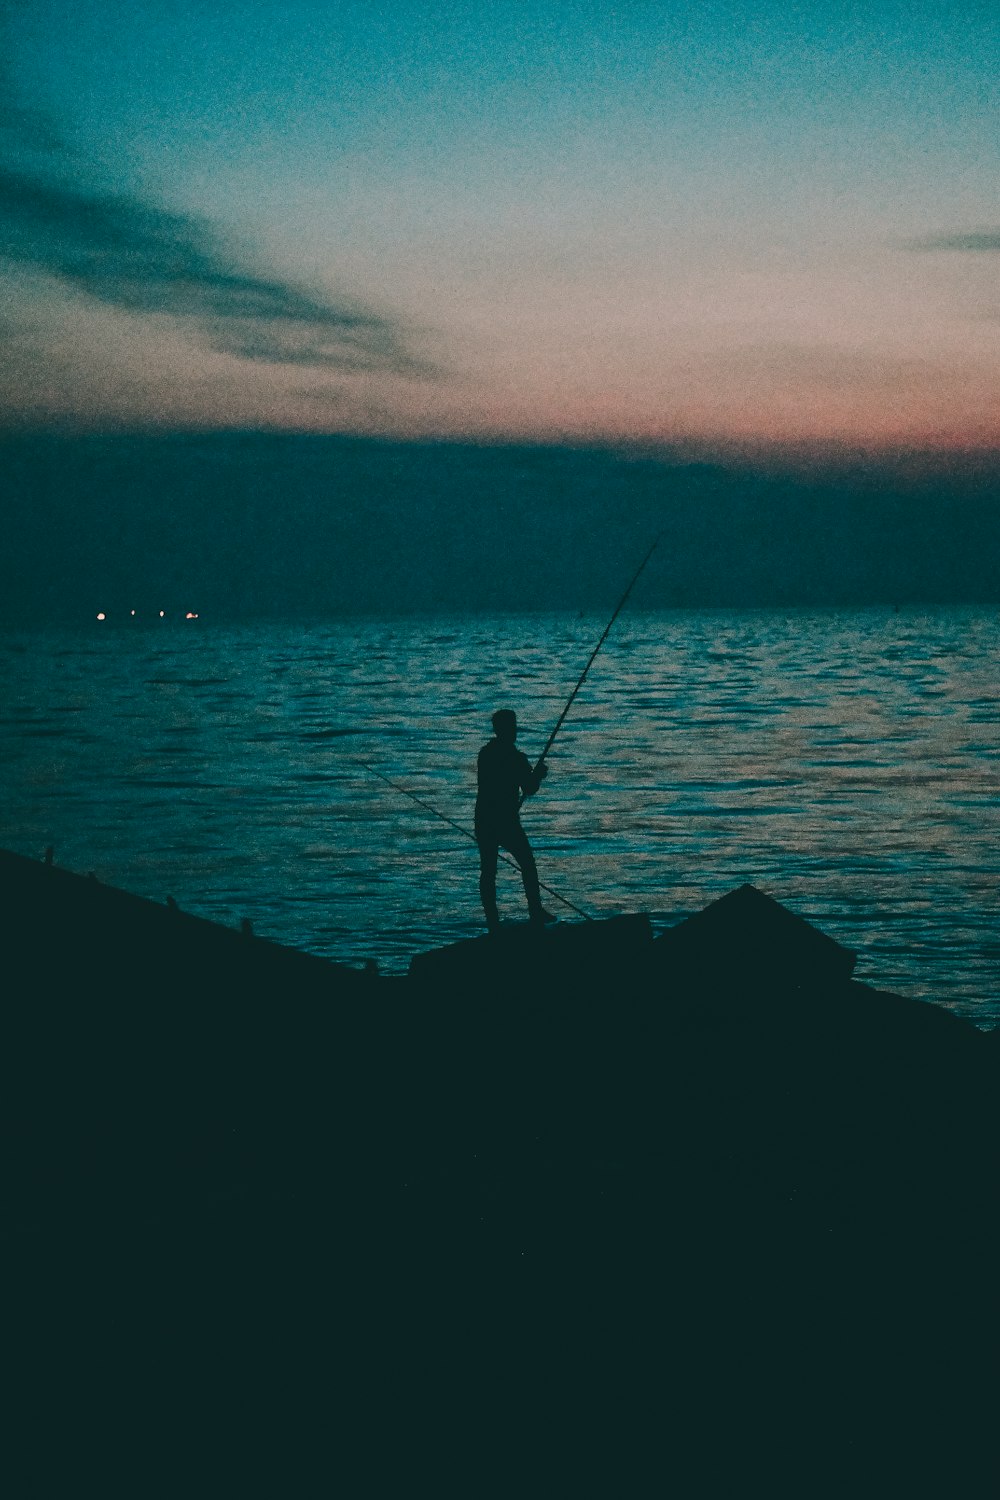 silhouette of person fishing across body of water